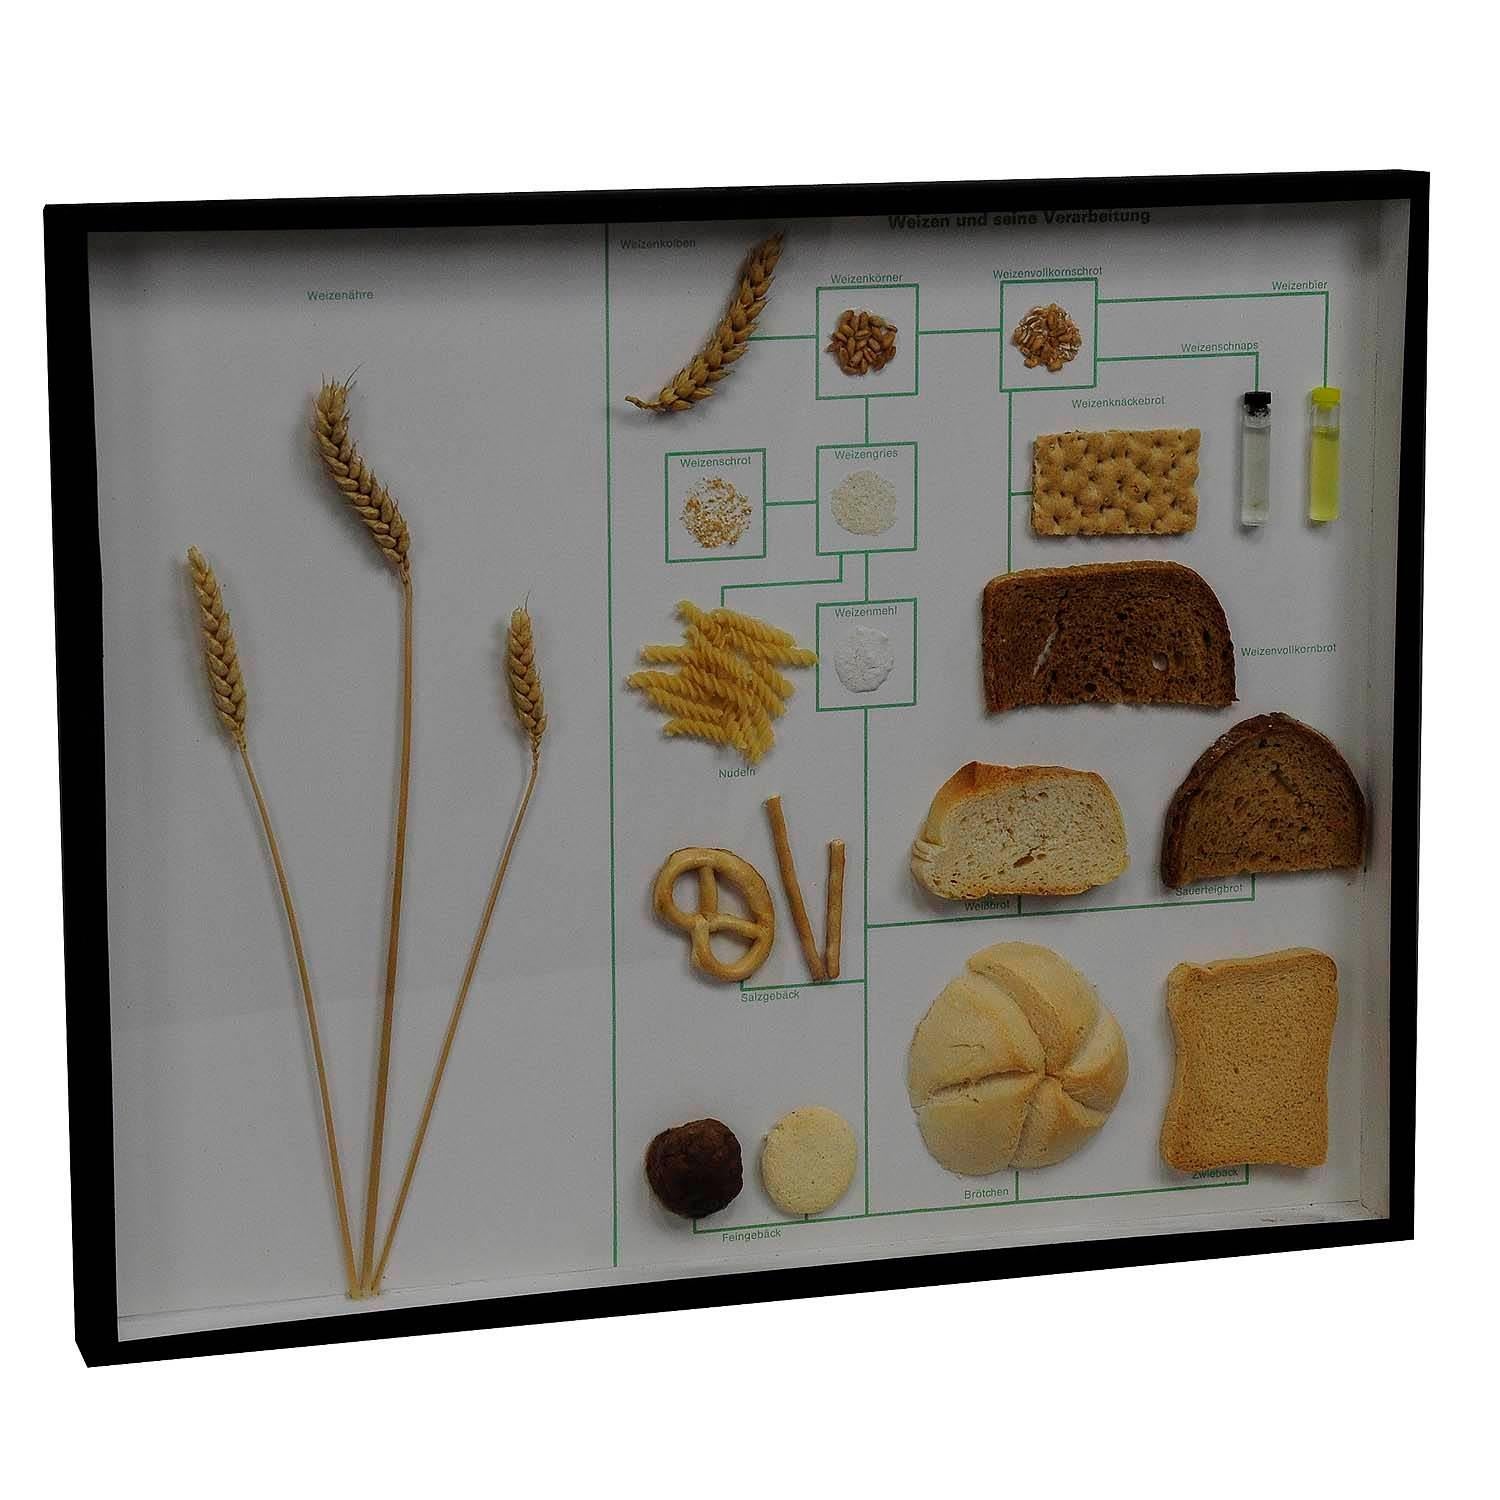 Vintage School Teaching Display Wheat Corn and its Products

A vintage glass showcase illustrating the wheat corn and products made out of wheat as there are bread, toast, pasta, flour, etc.. Used as teaching material in German schools ca.